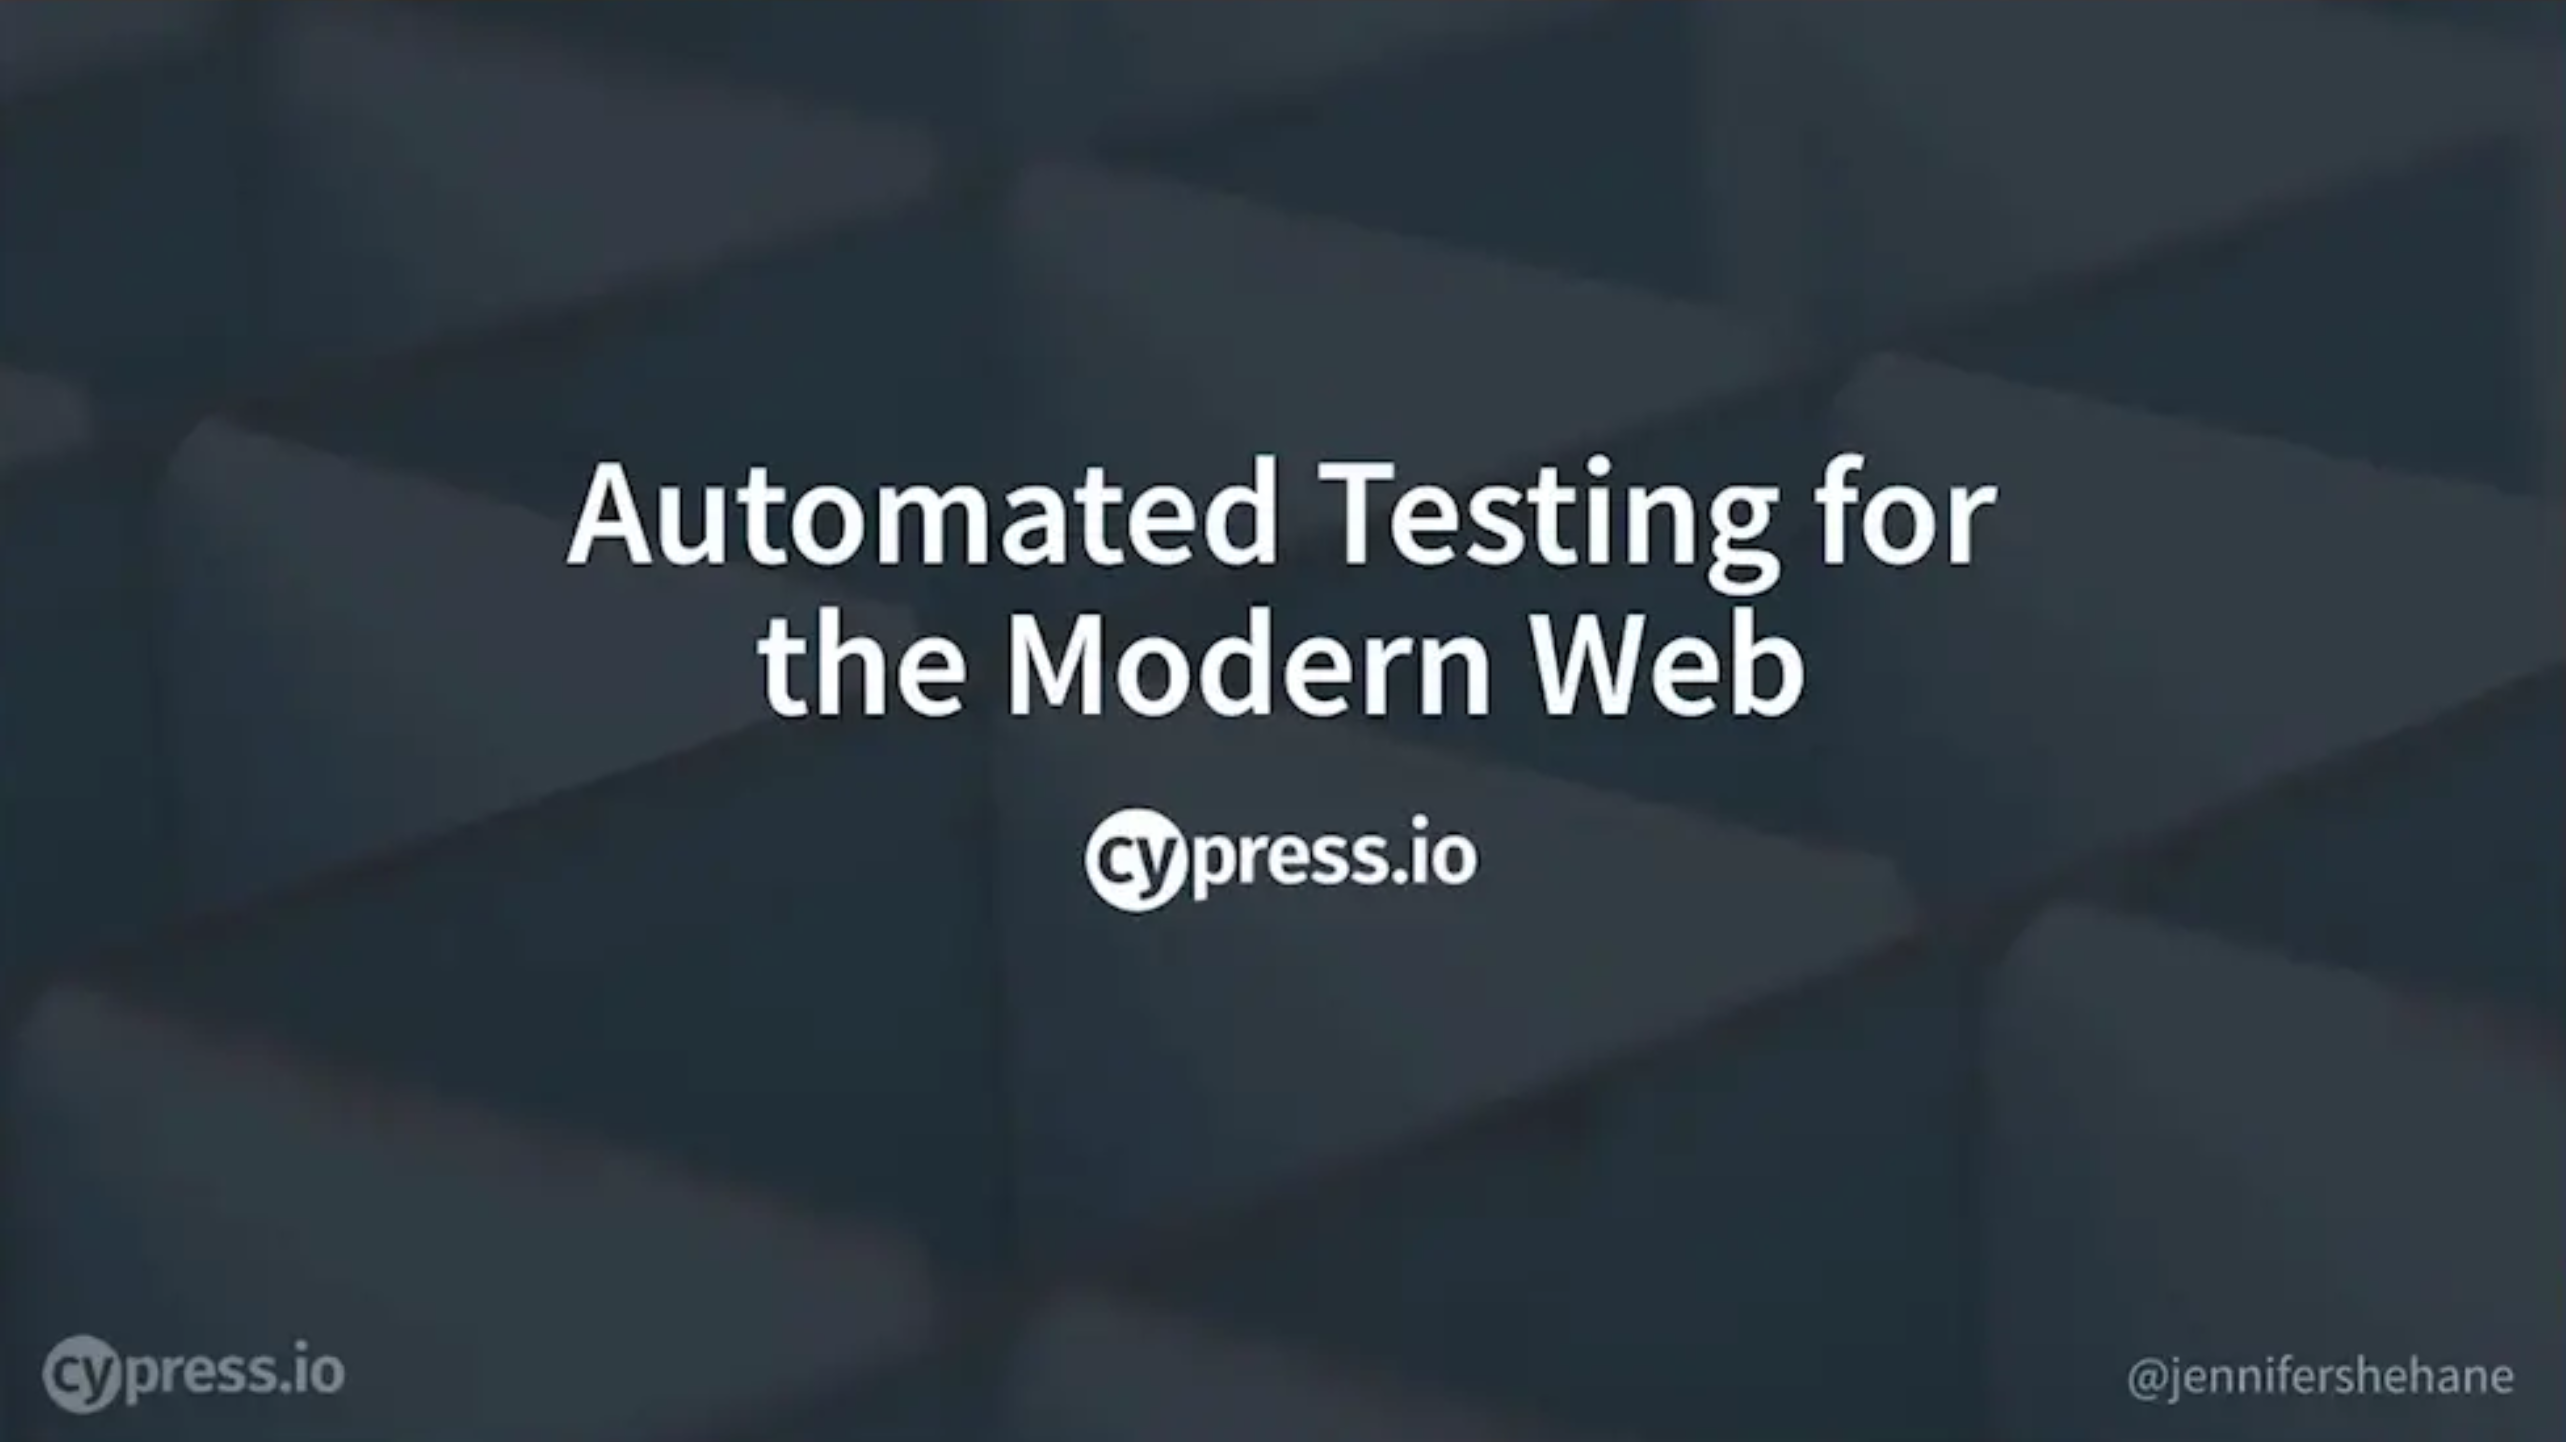 Automated Testing for the Modern Web